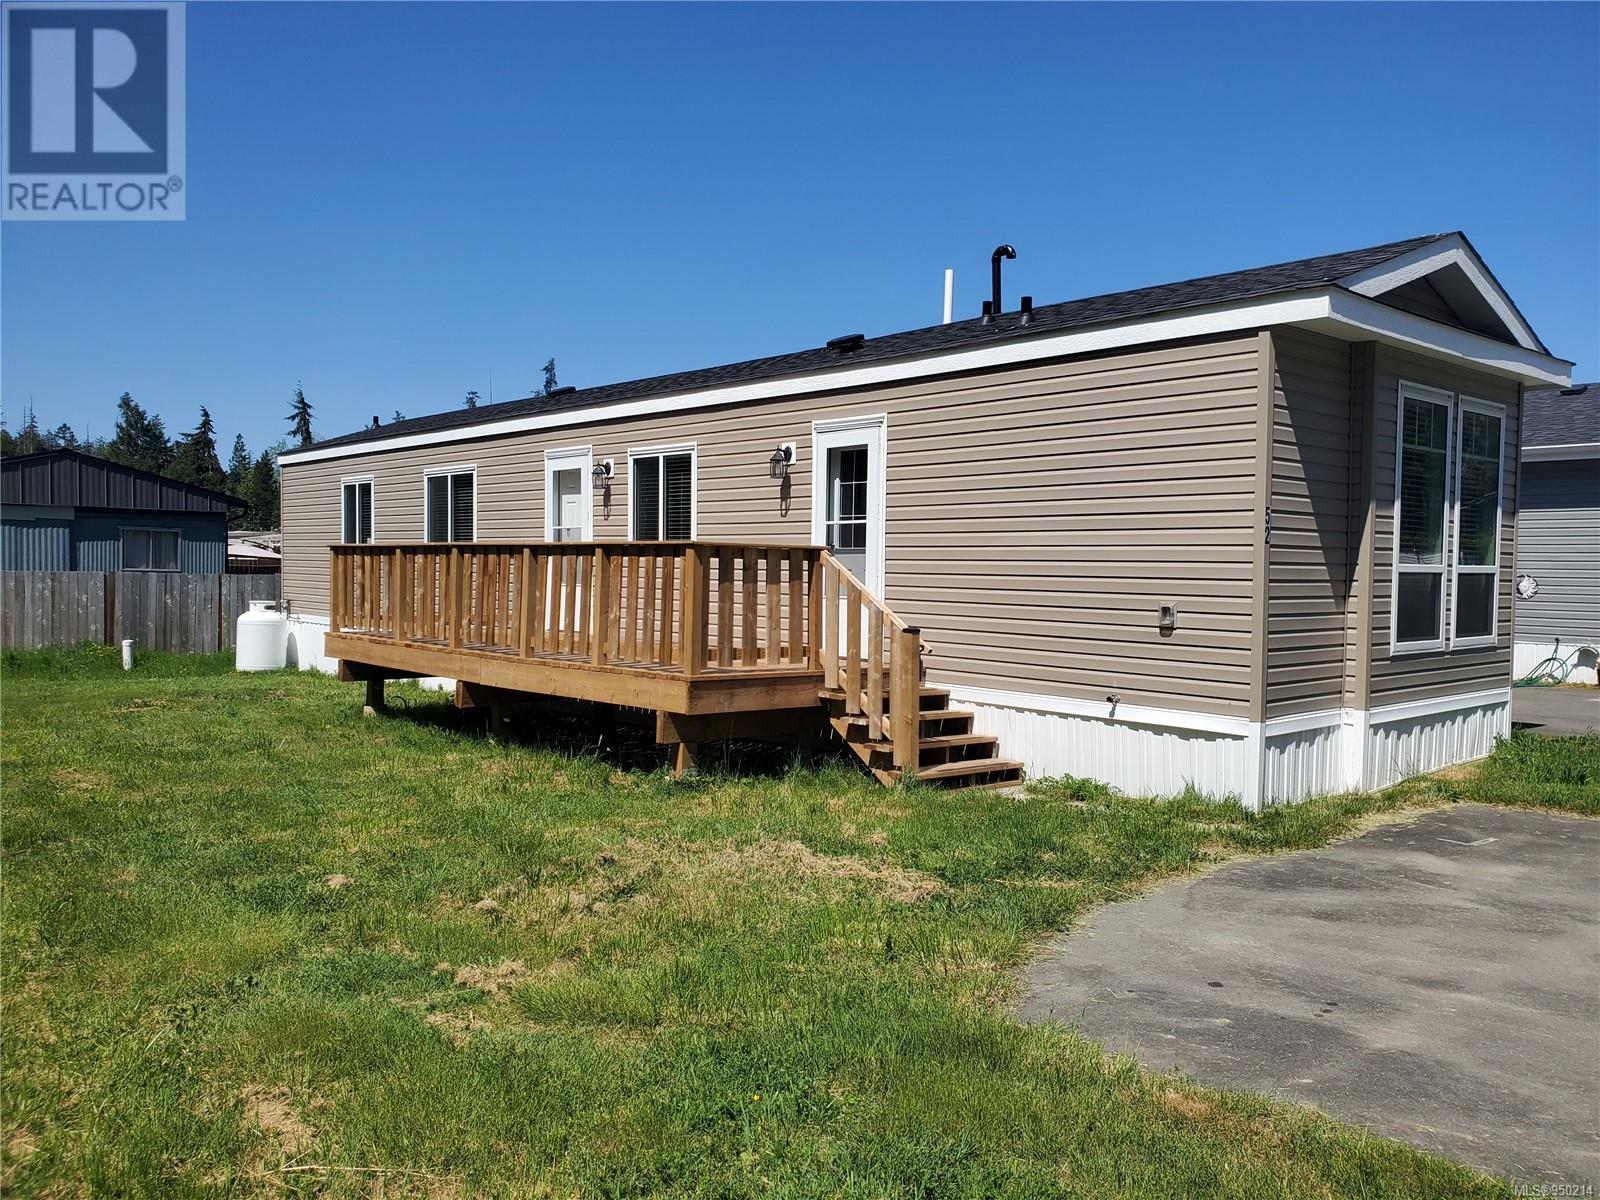 52 1720 Whibley Rd located in Coombs, British Columbia